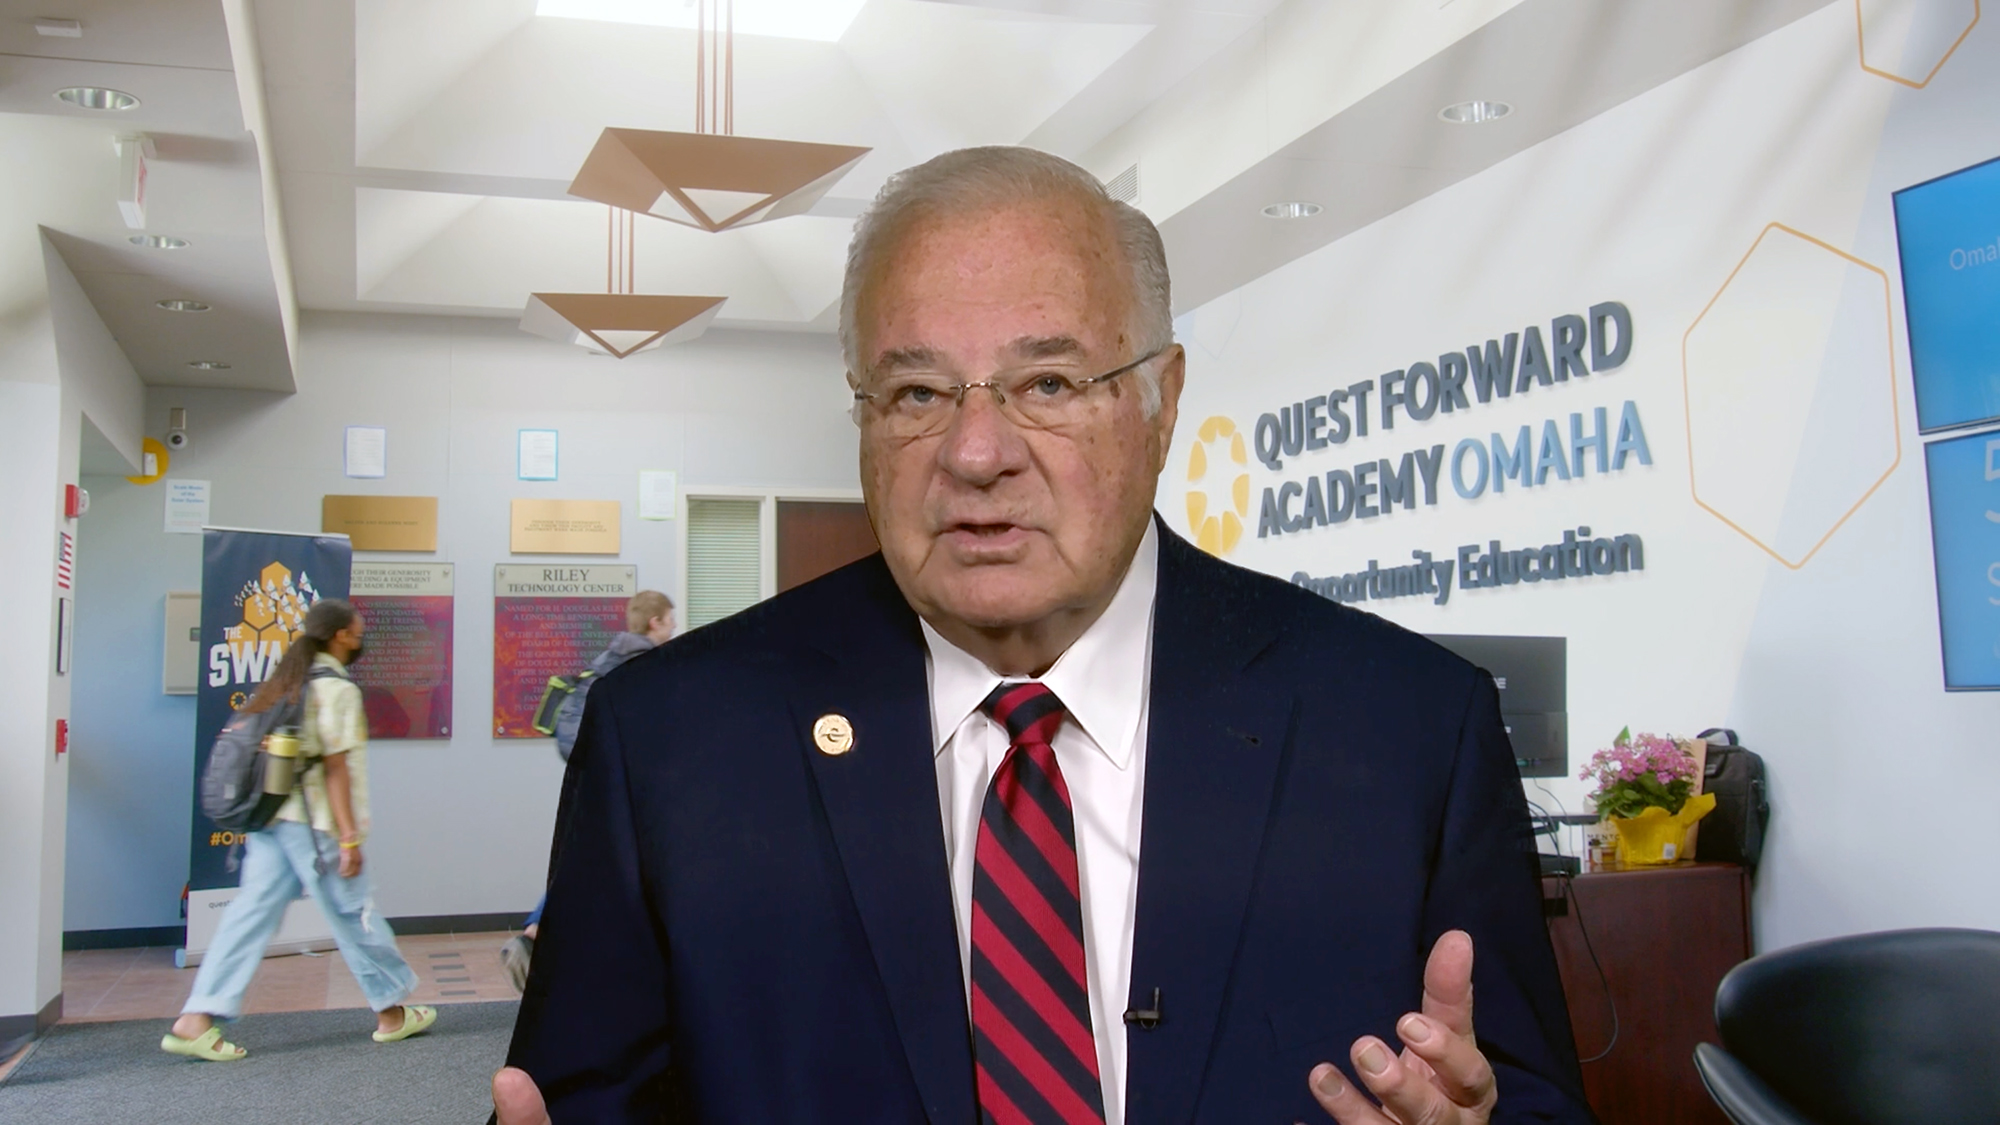 Video still: Opportunity Education Founder, CEO, and Benefactor Joe Ricketts discusses the challenges facing education today.